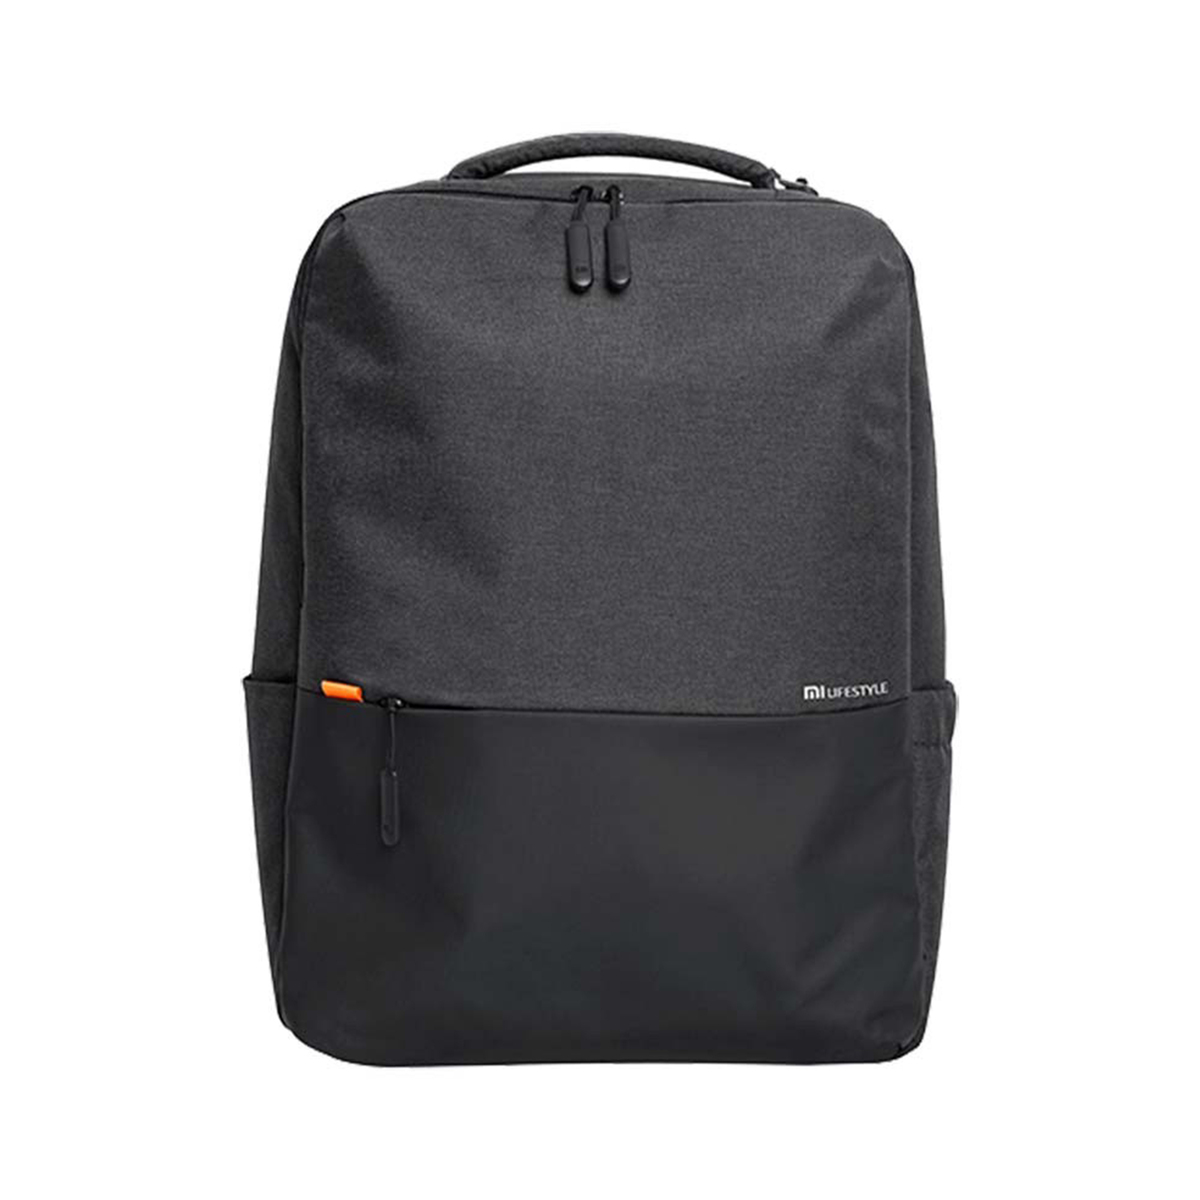 Mi Business Casual Backpack BHR4903GL 15.6"